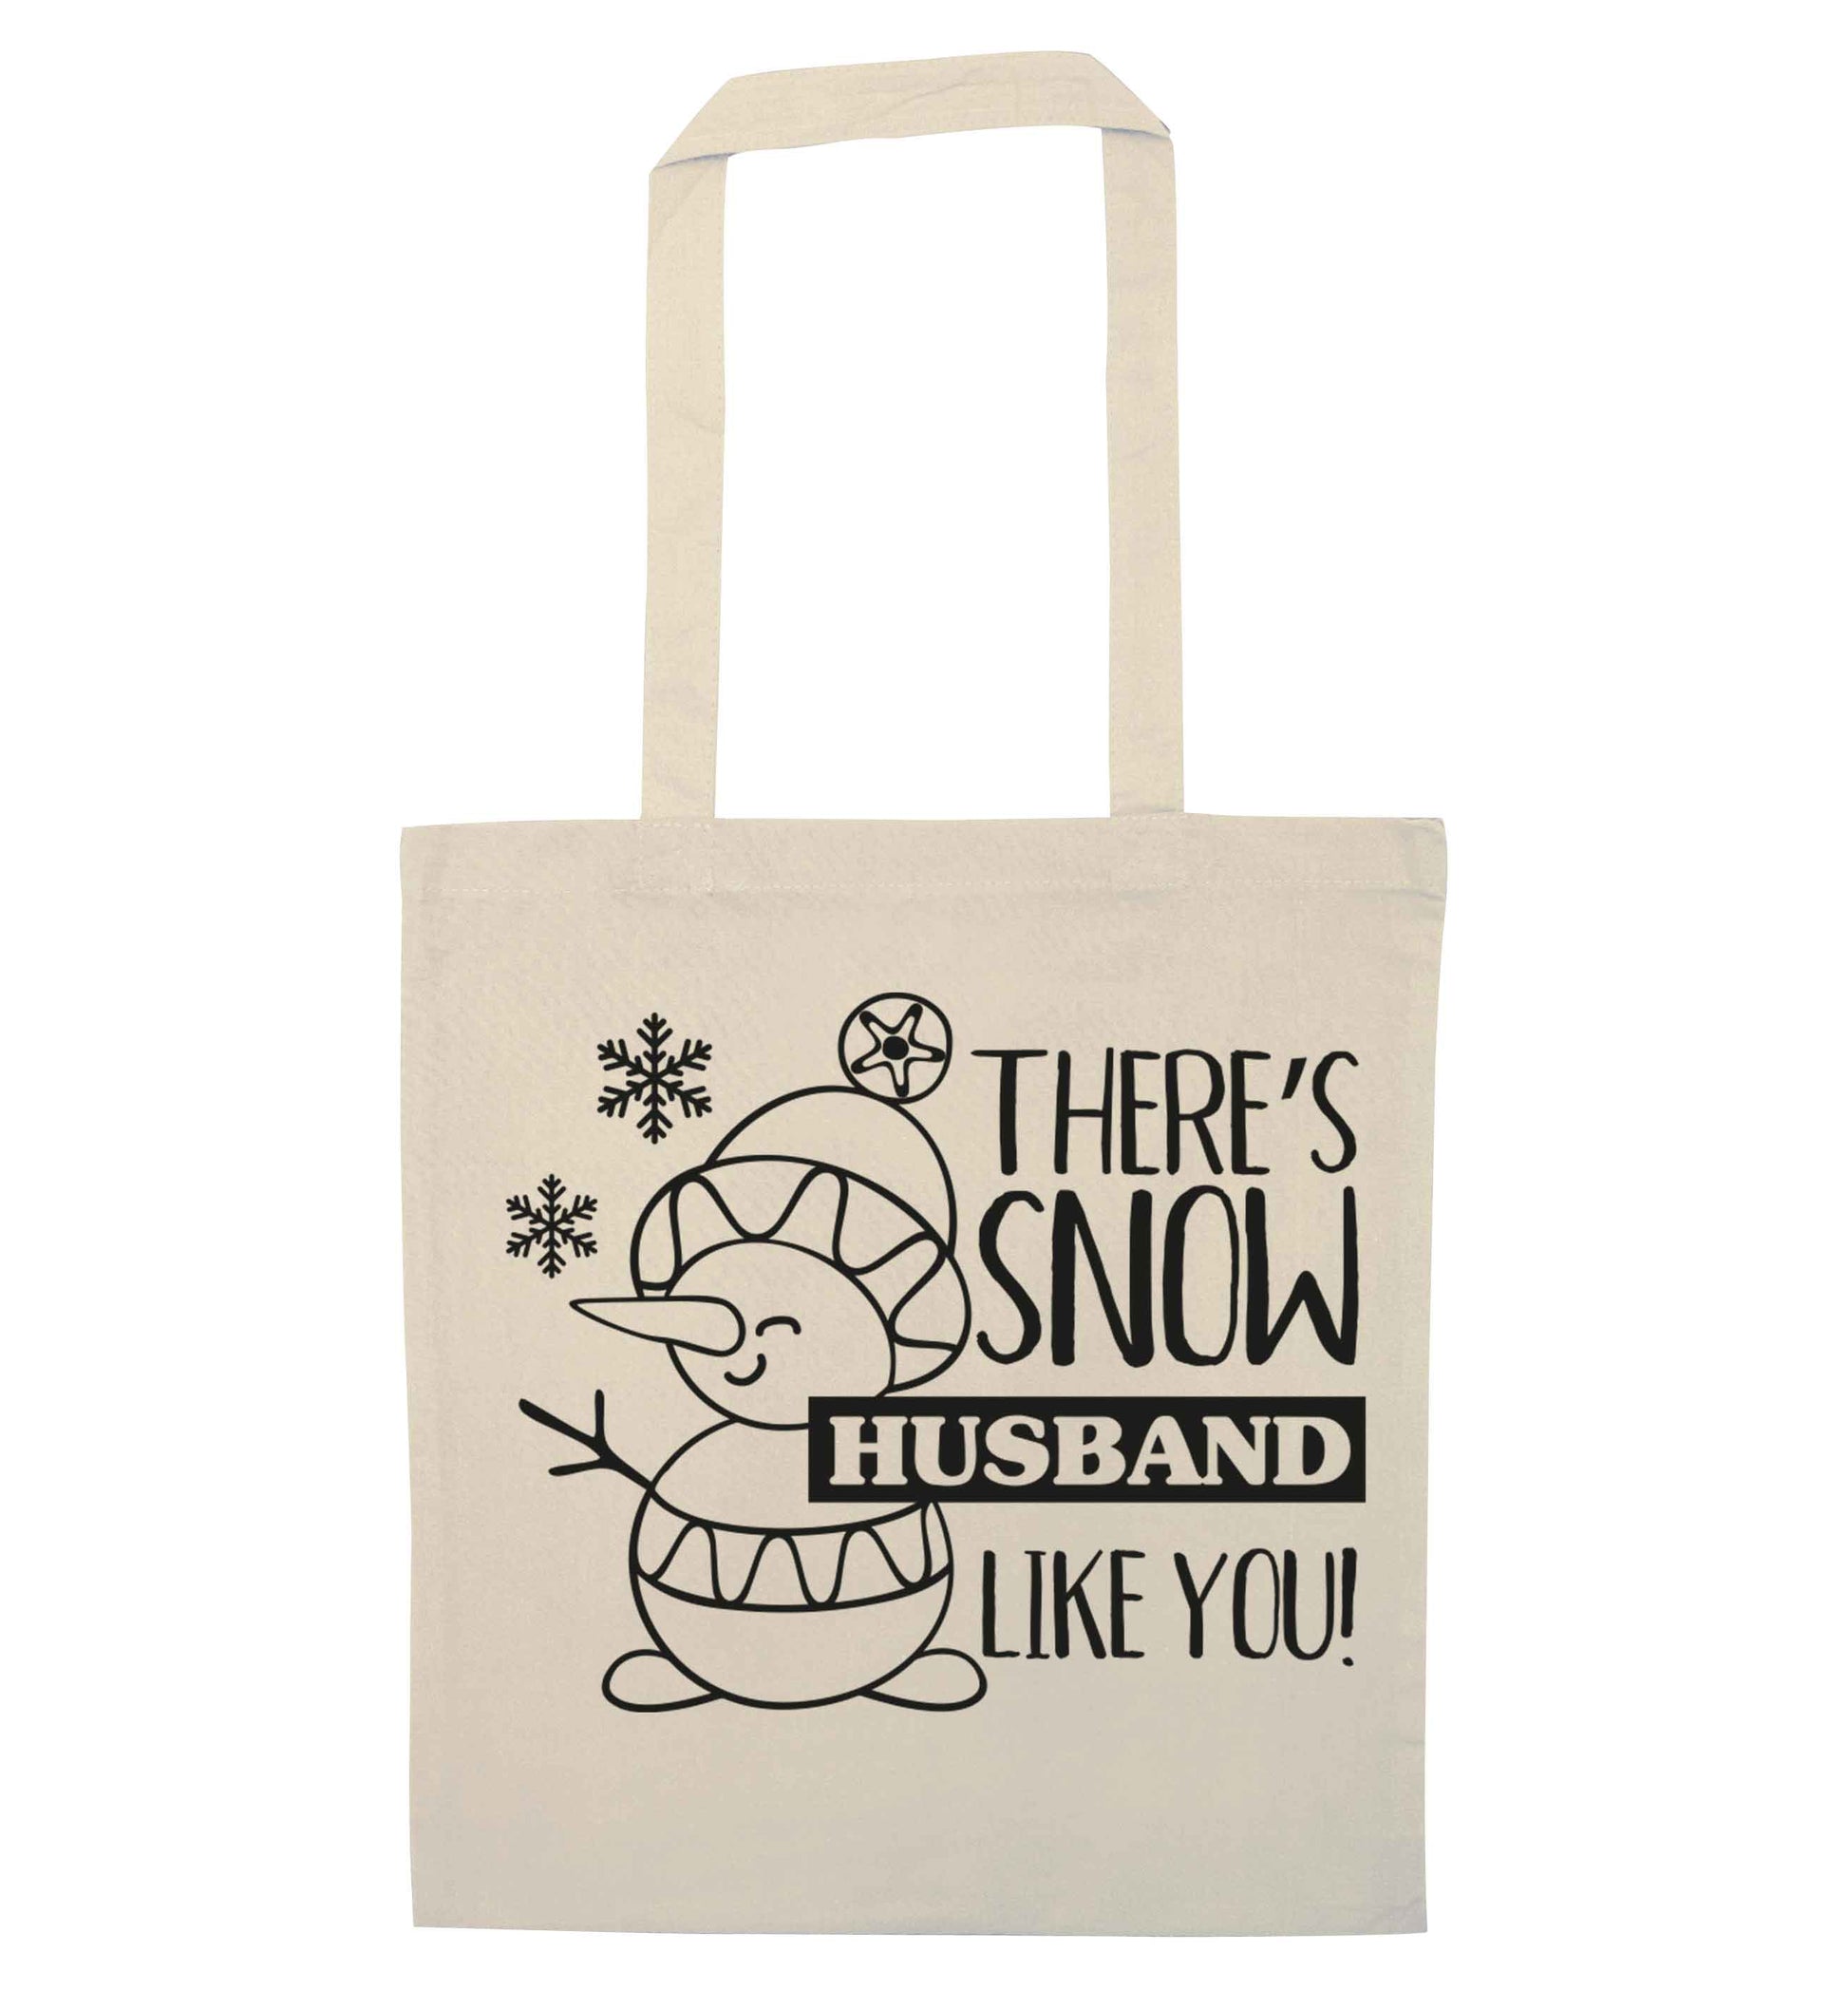 There's snow husband like you natural tote bag